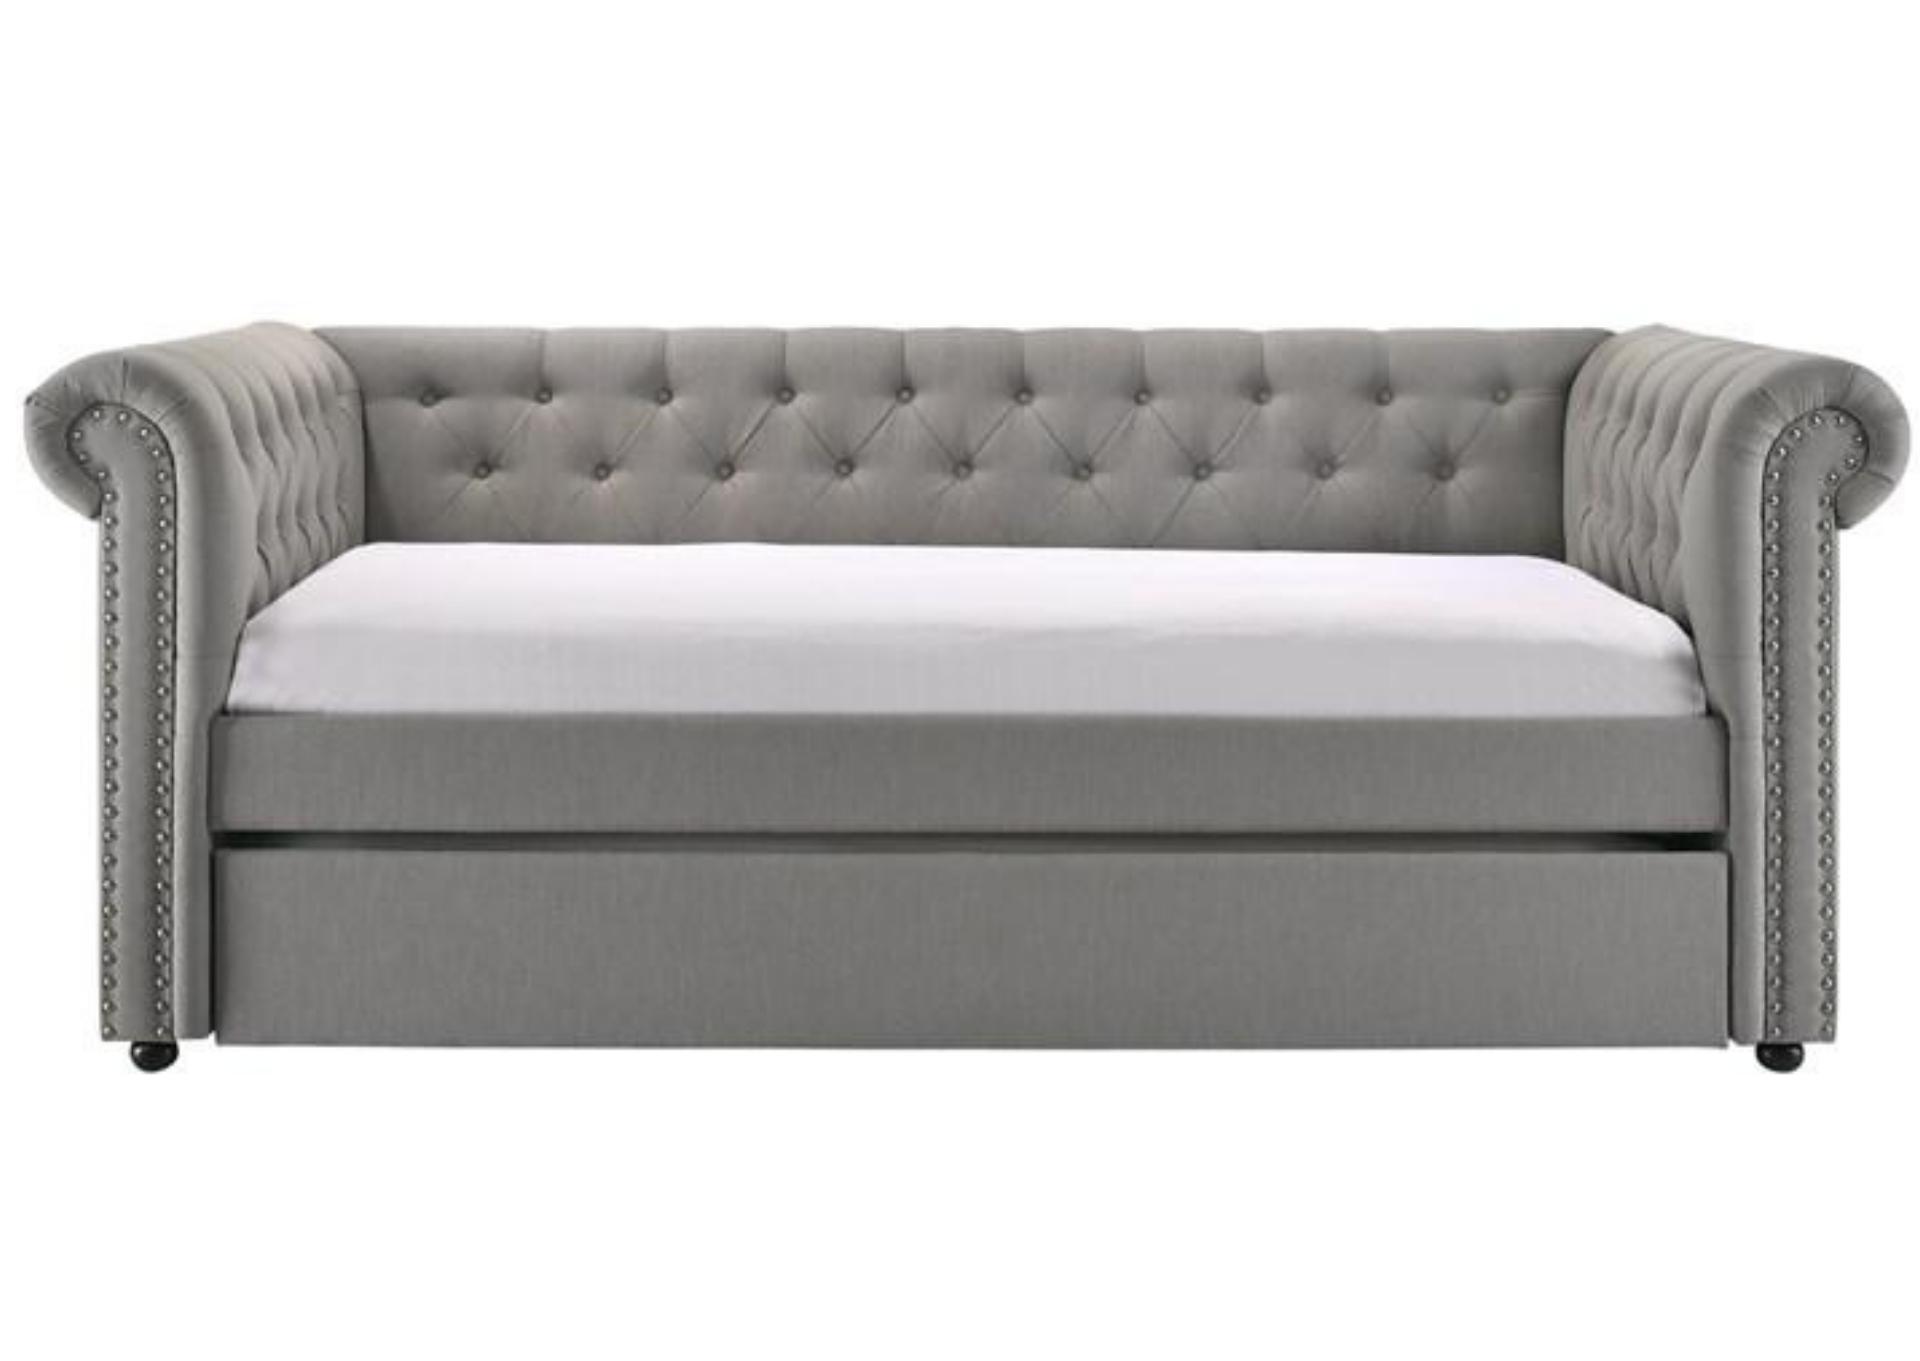 ELLIE DOVE DAYBED WITH TRUNDLE